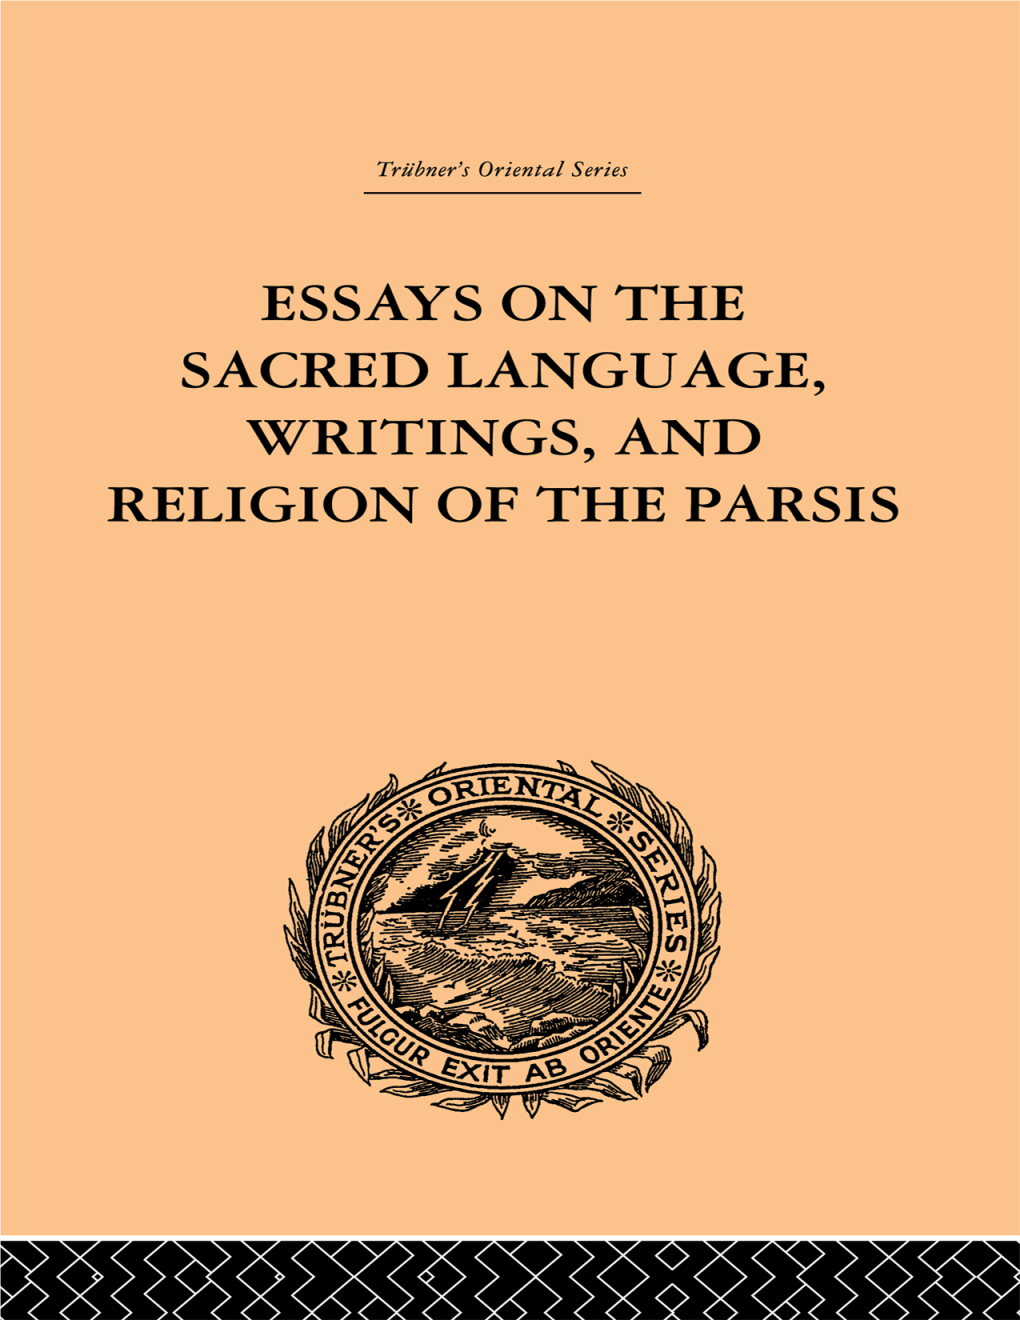 ESSAYS on the SACRED LANGUAGE, WRITINGS, and RELIGION of the PARSIS Triibner's Oriental Series